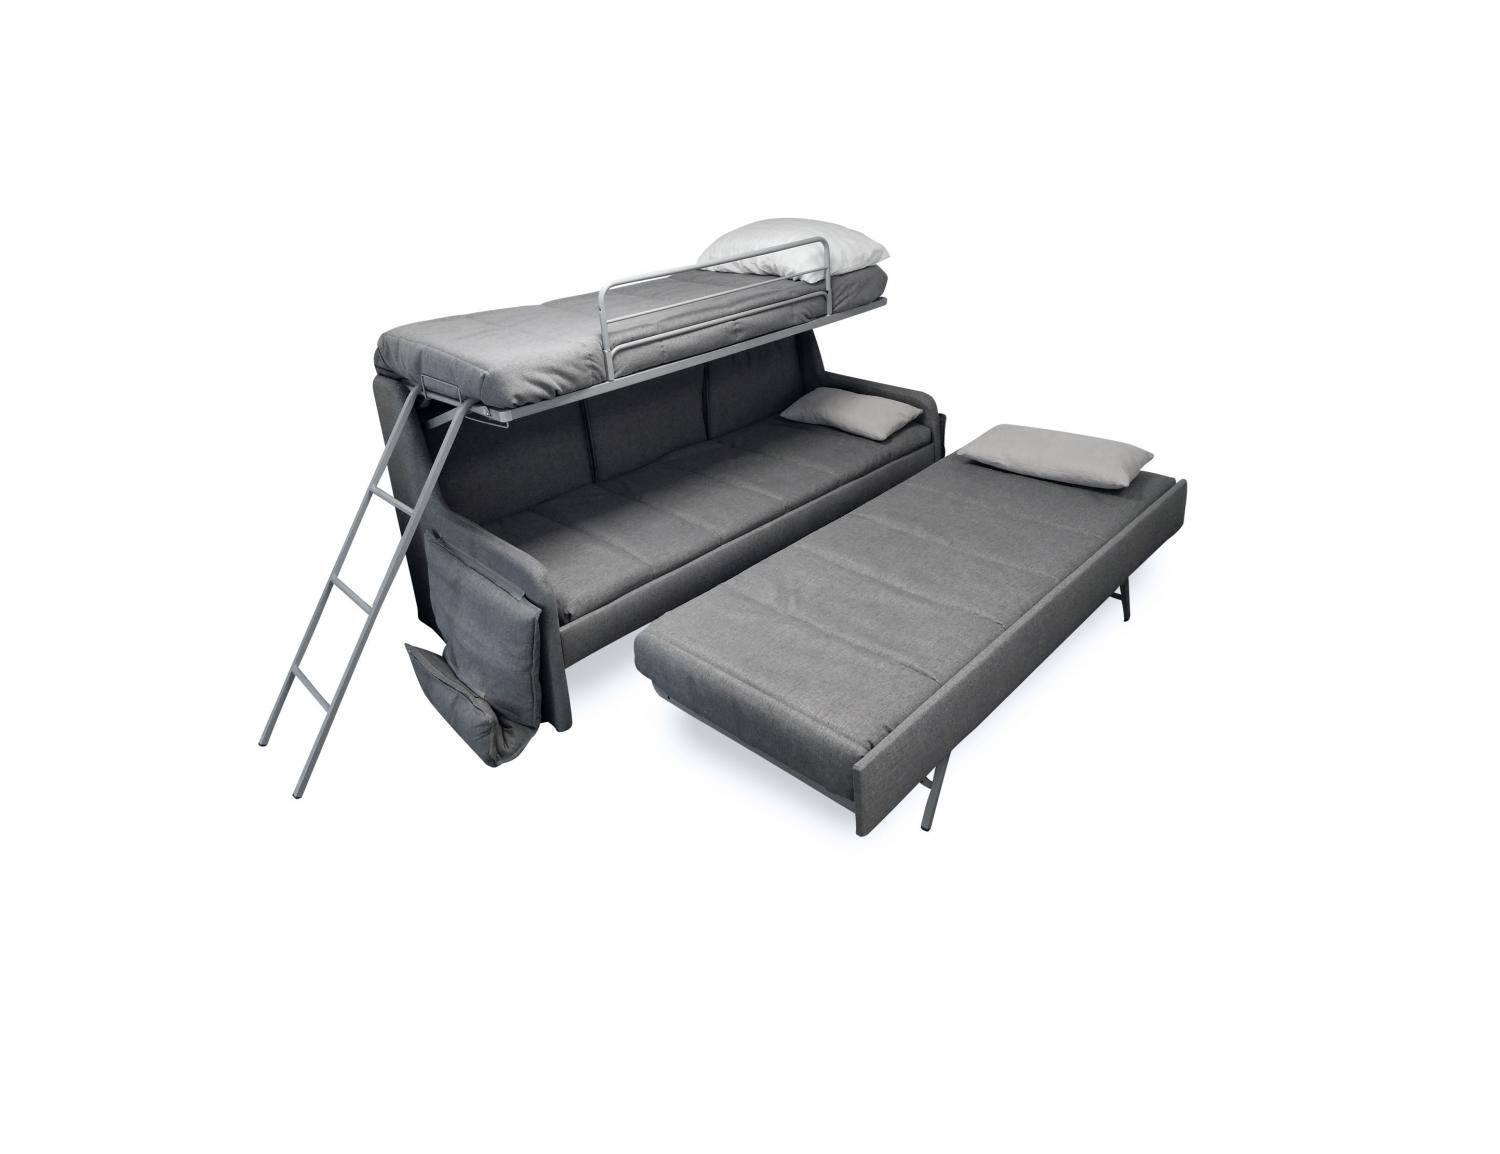 This Transforming Bunk Bed Sleeps 3 And, Hide A Bunk Bed Couch